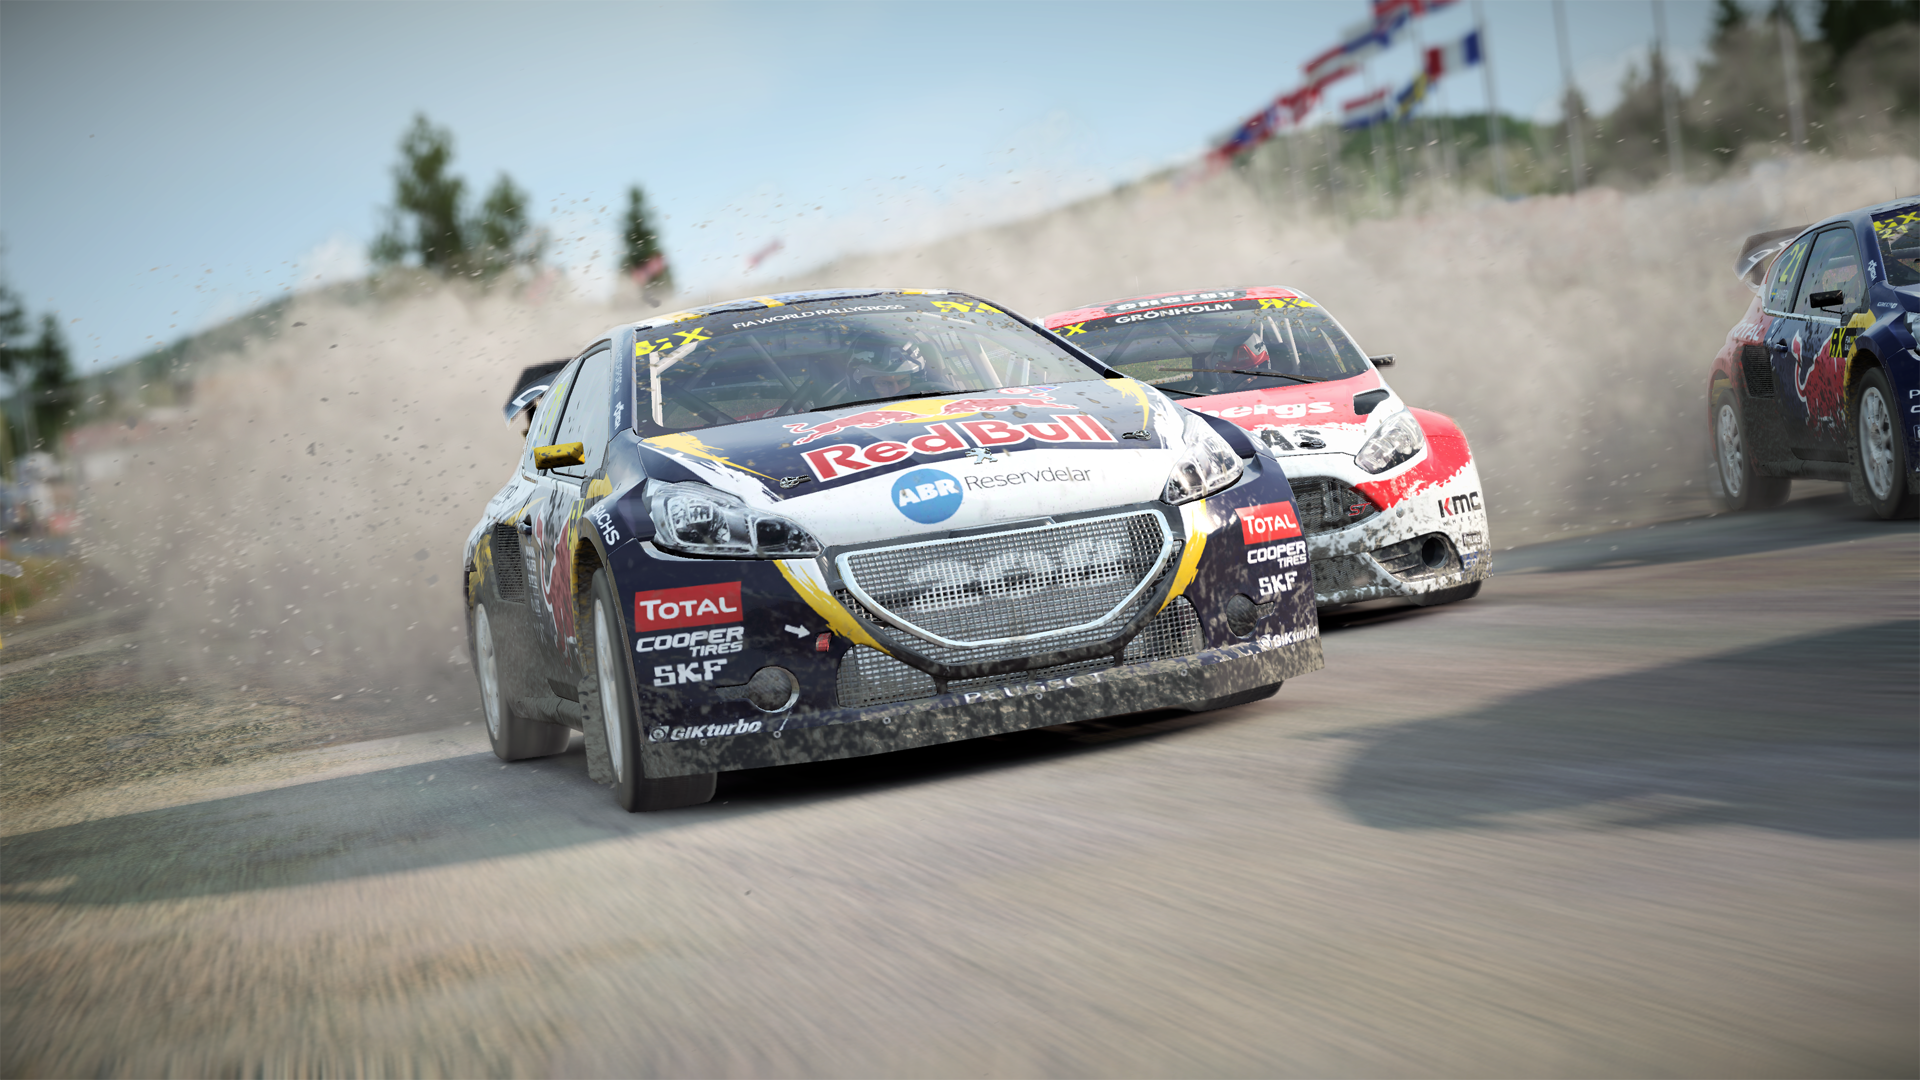 More information about "Nuovo road book per DiRT 4"